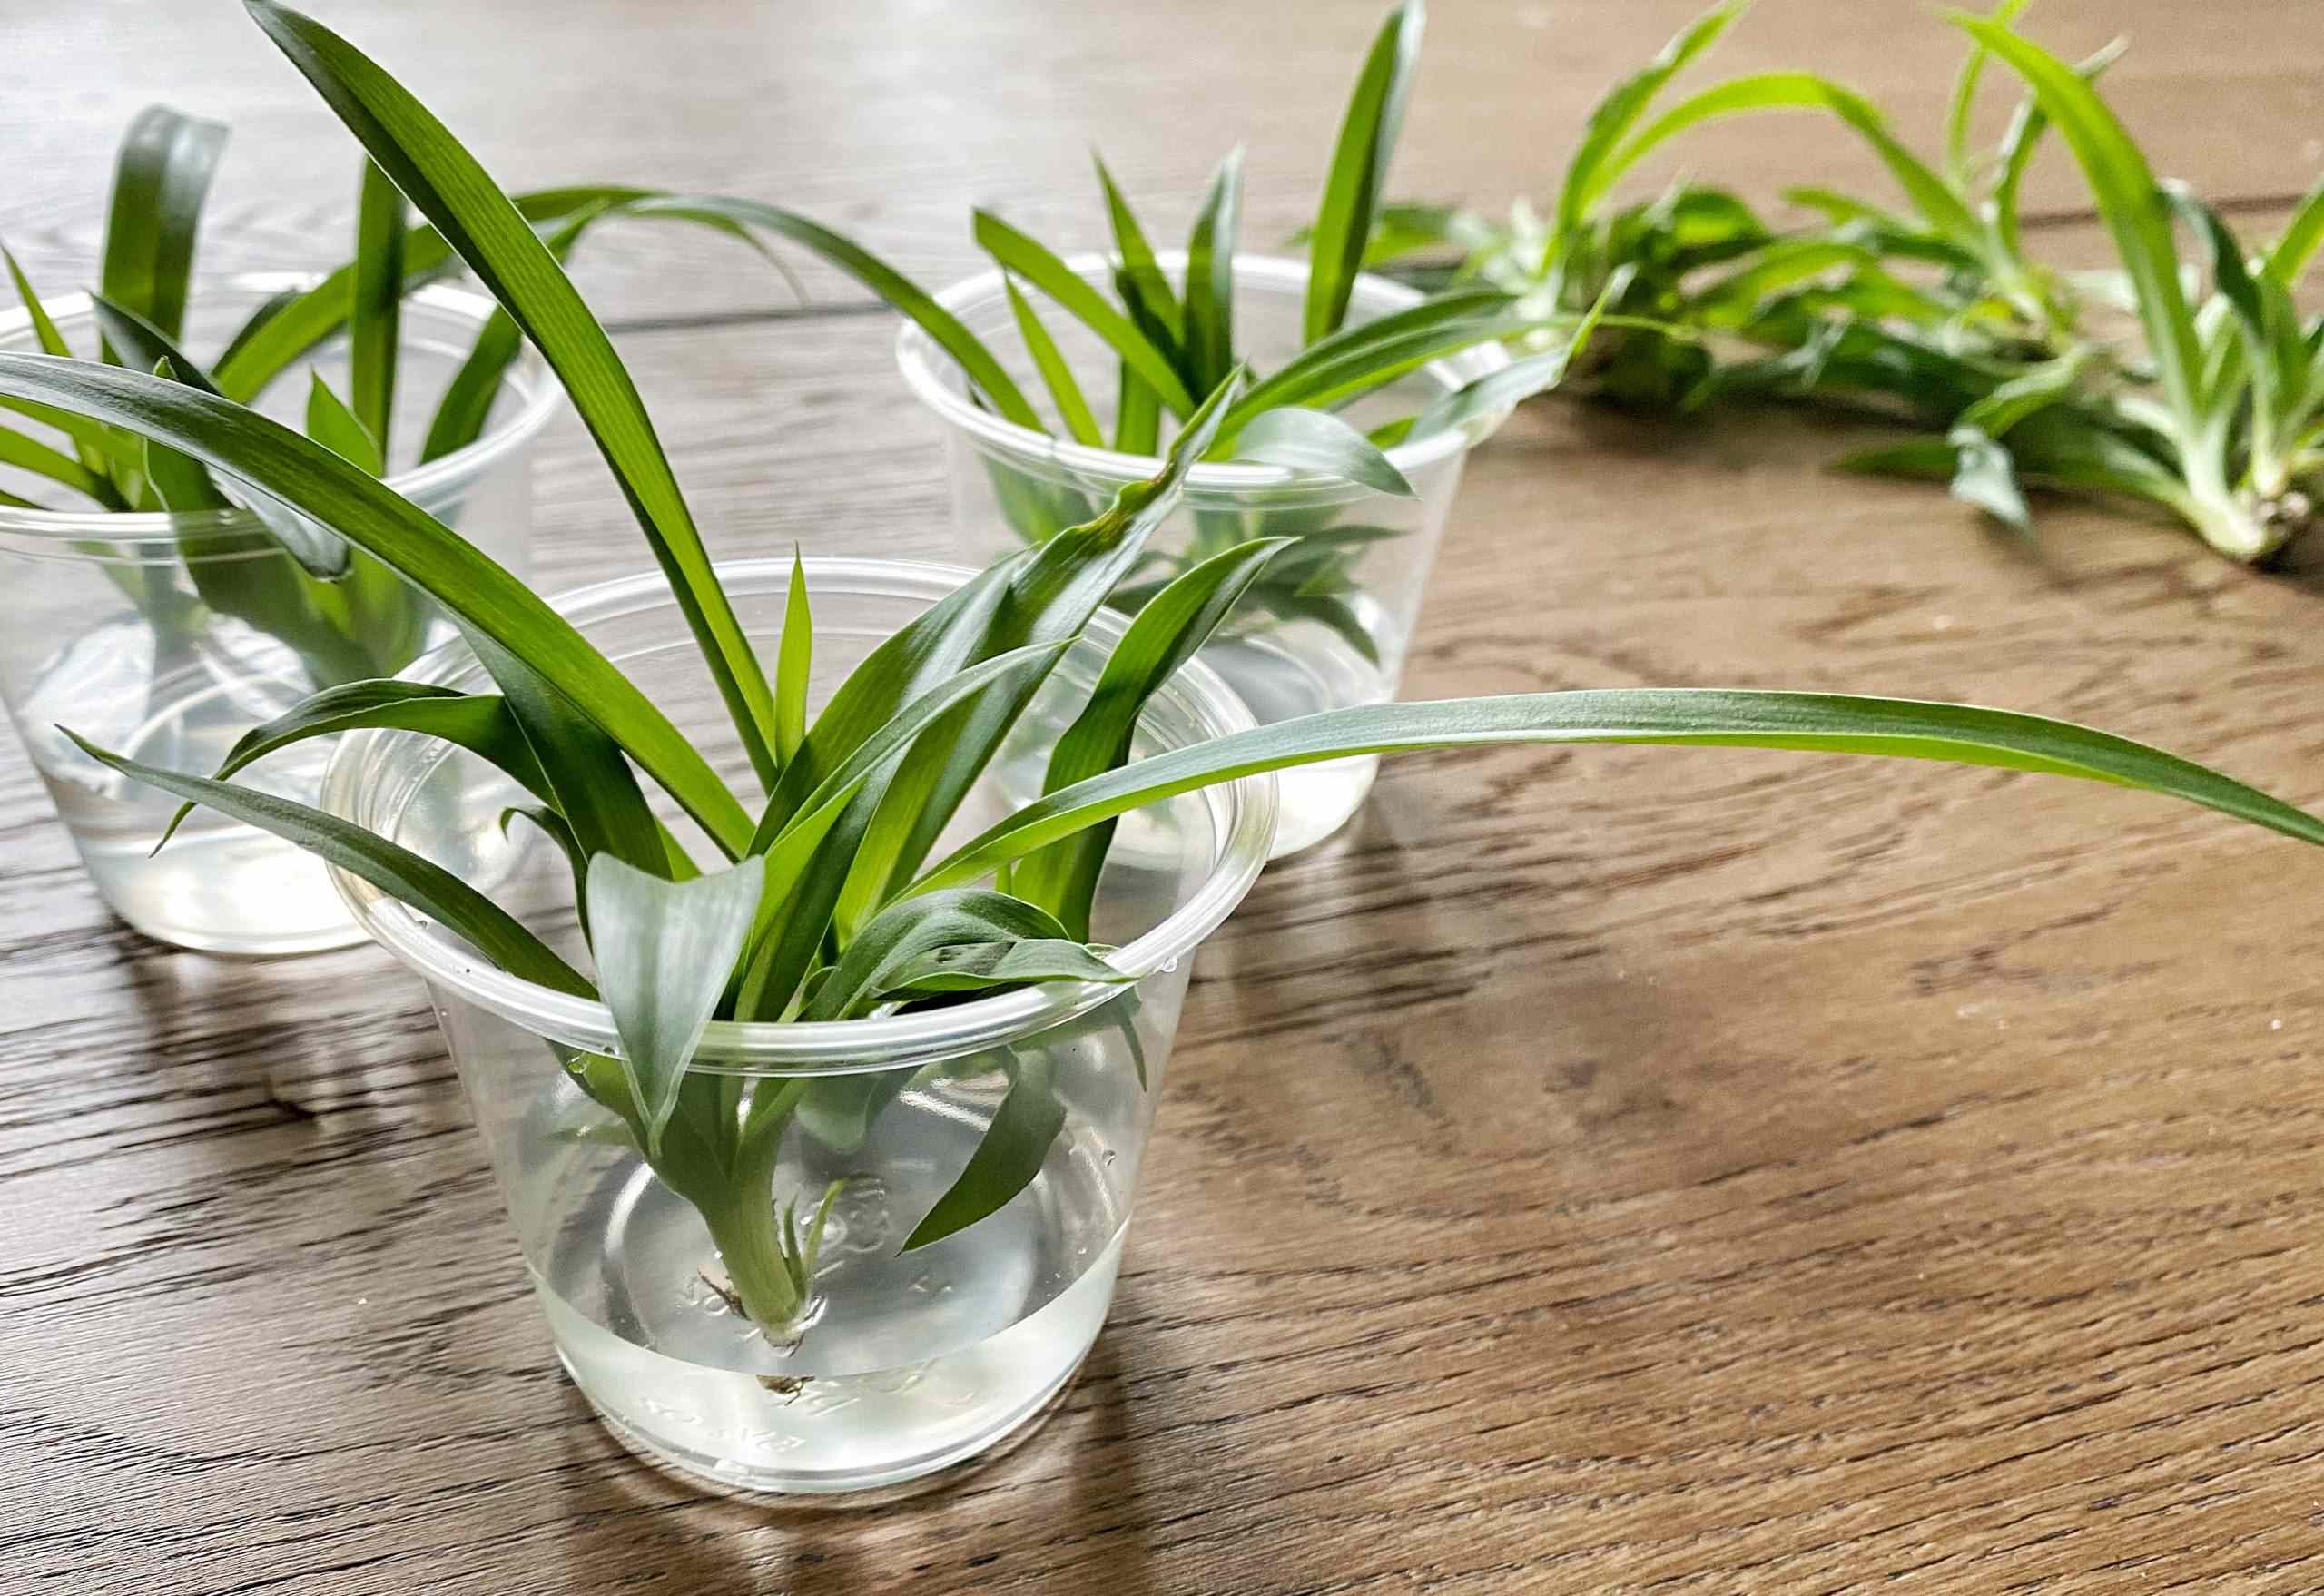 How Long Do Spider Plant Roots Need To Be Before Planting